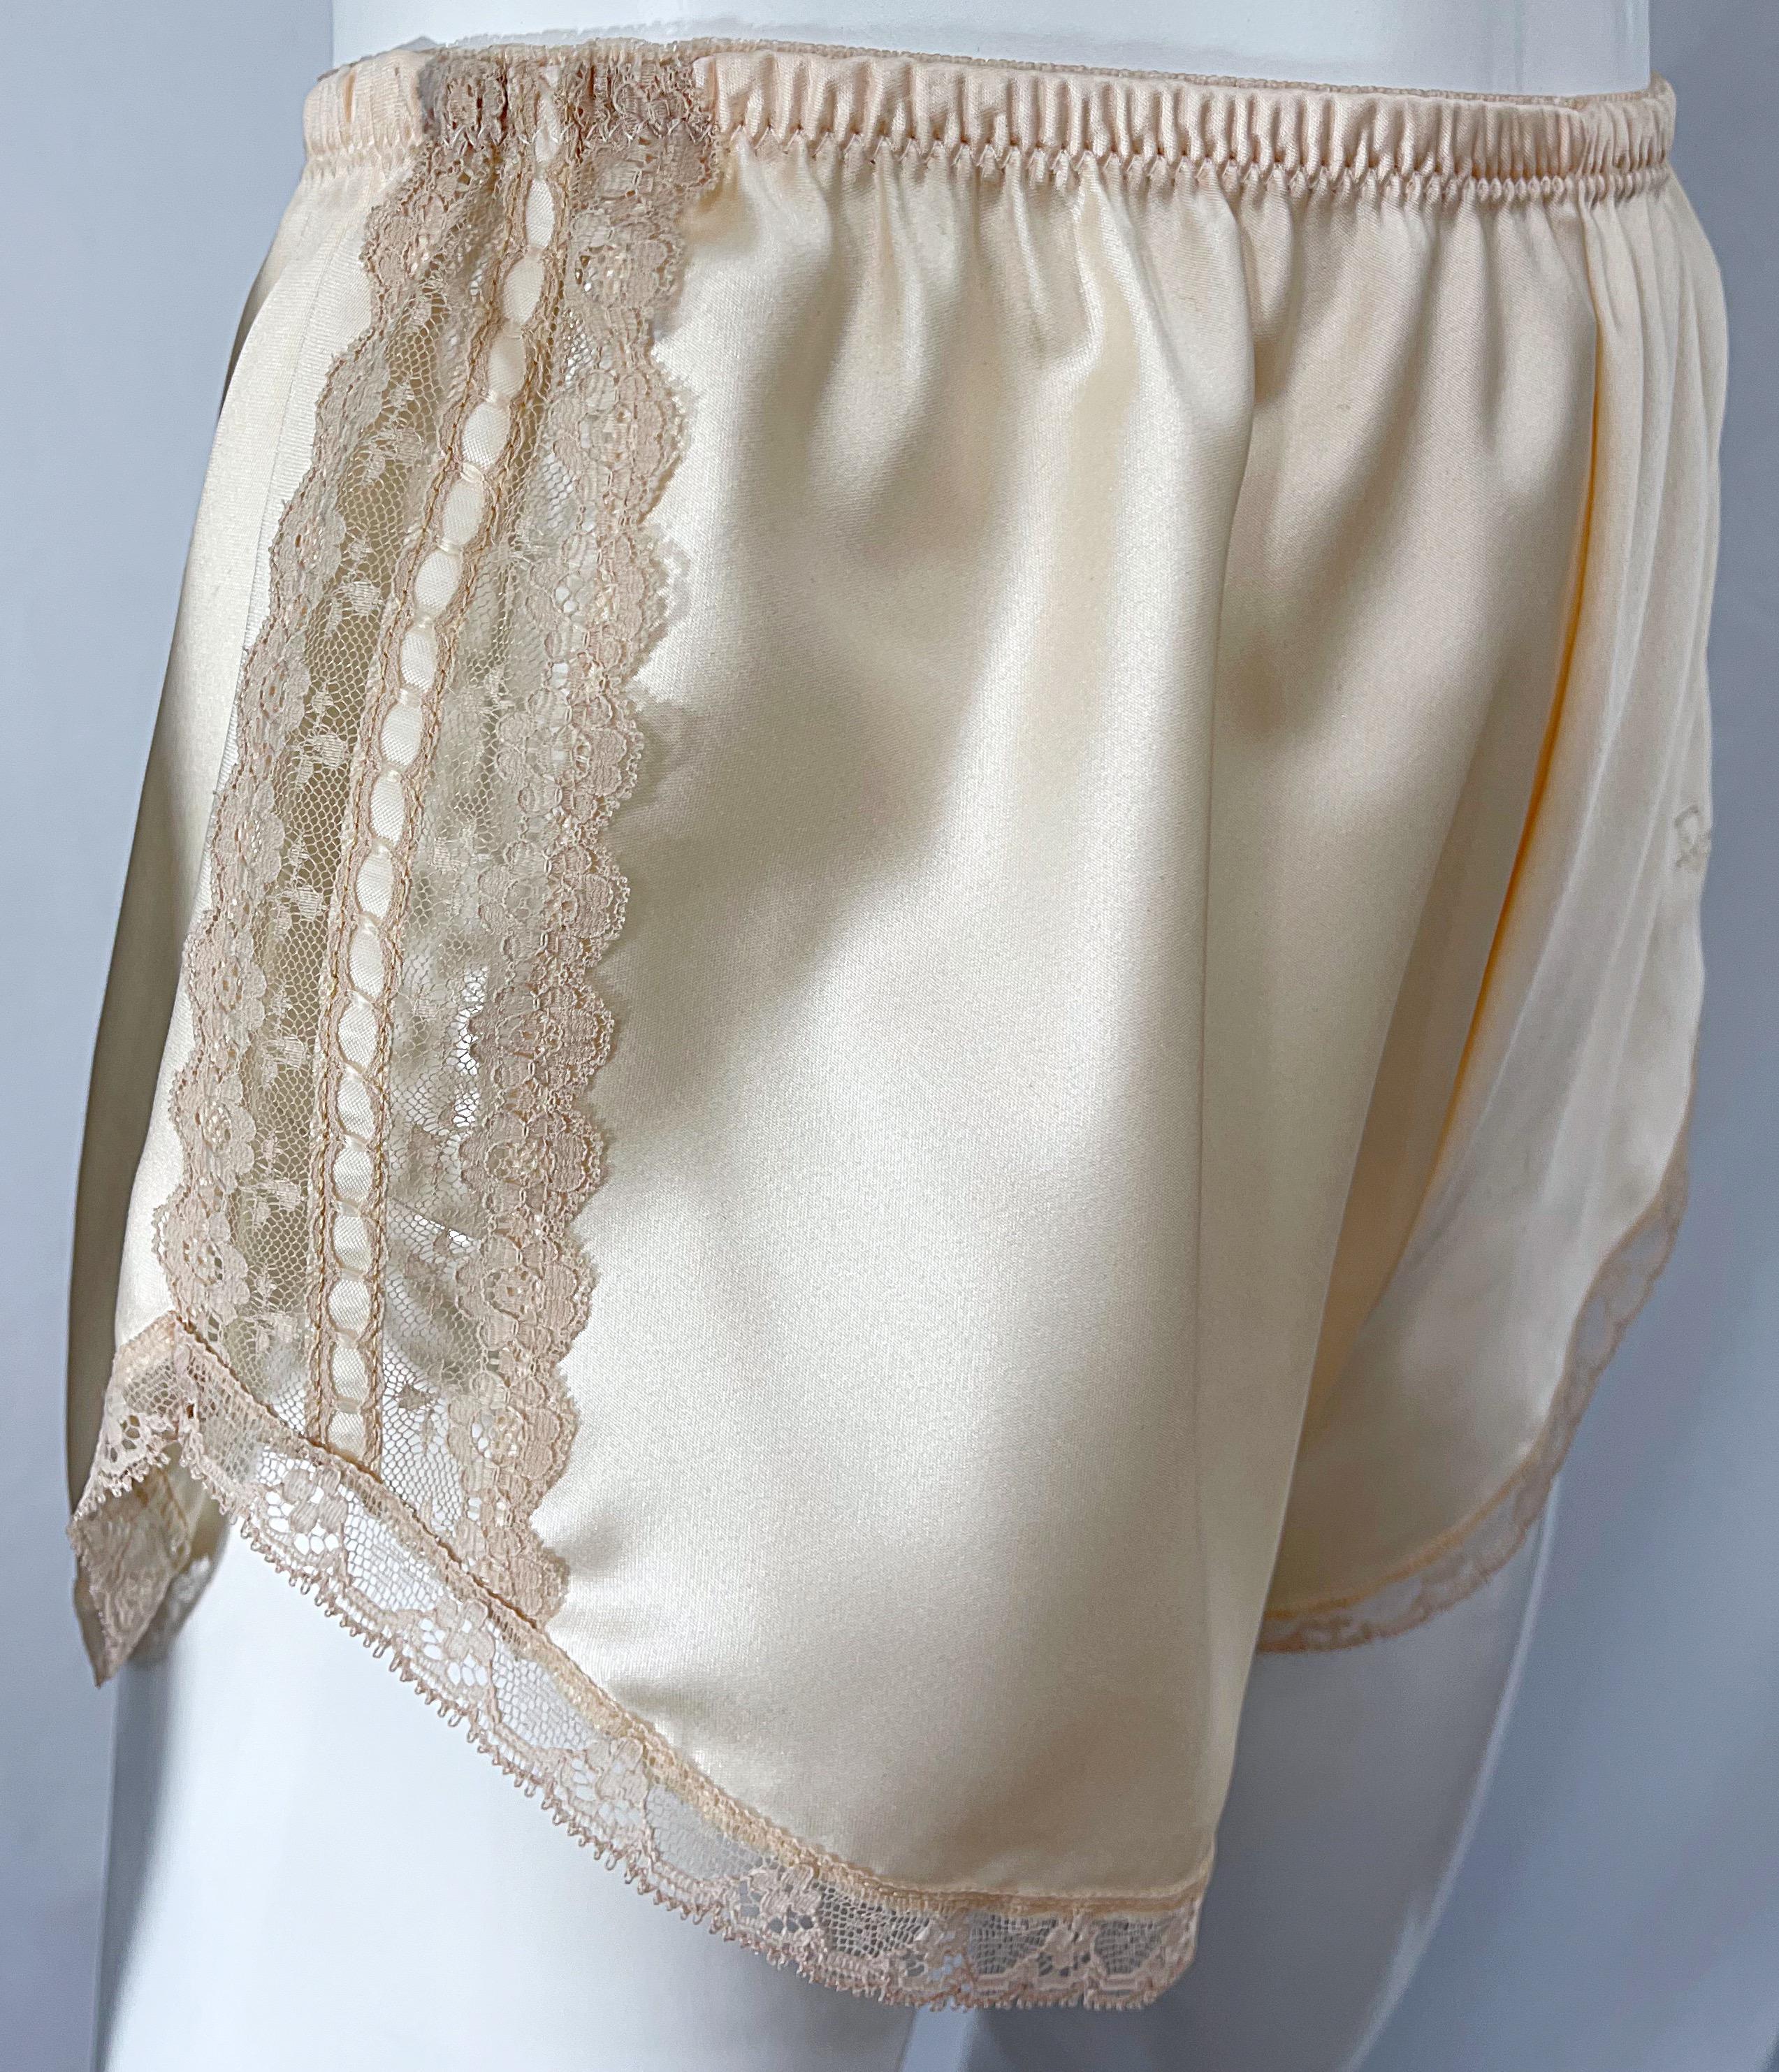 NWT 1980s Christian Dior Ivory Satin Lace Three Piece Cami 80s Lingerie PJ Set  For Sale 10